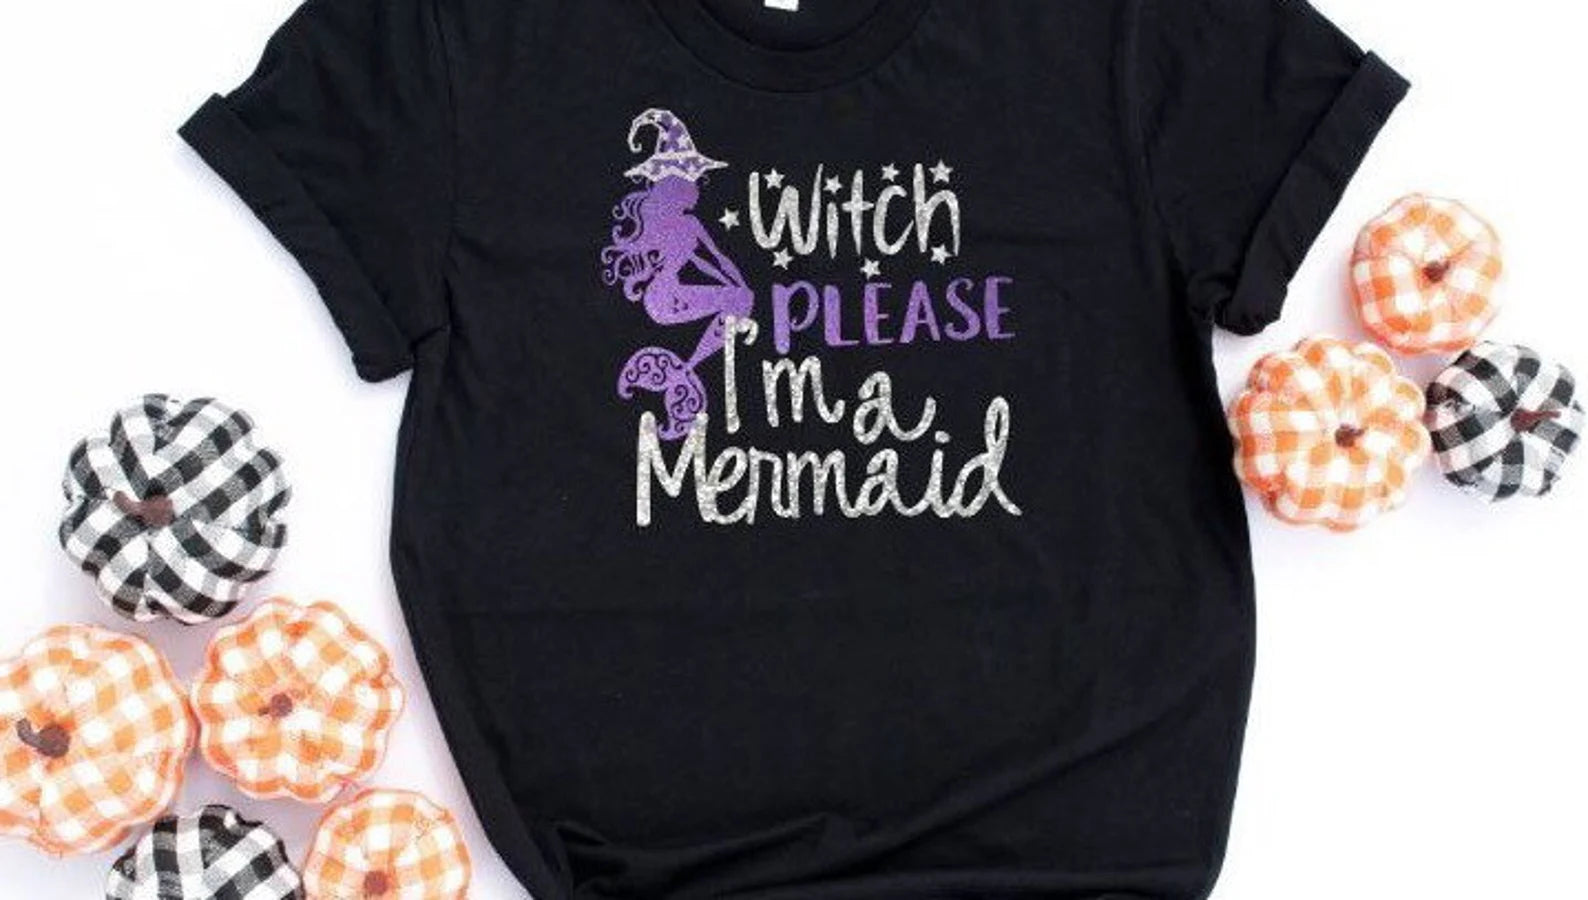 Witch Please Mermaid Halloween Shirt for Women